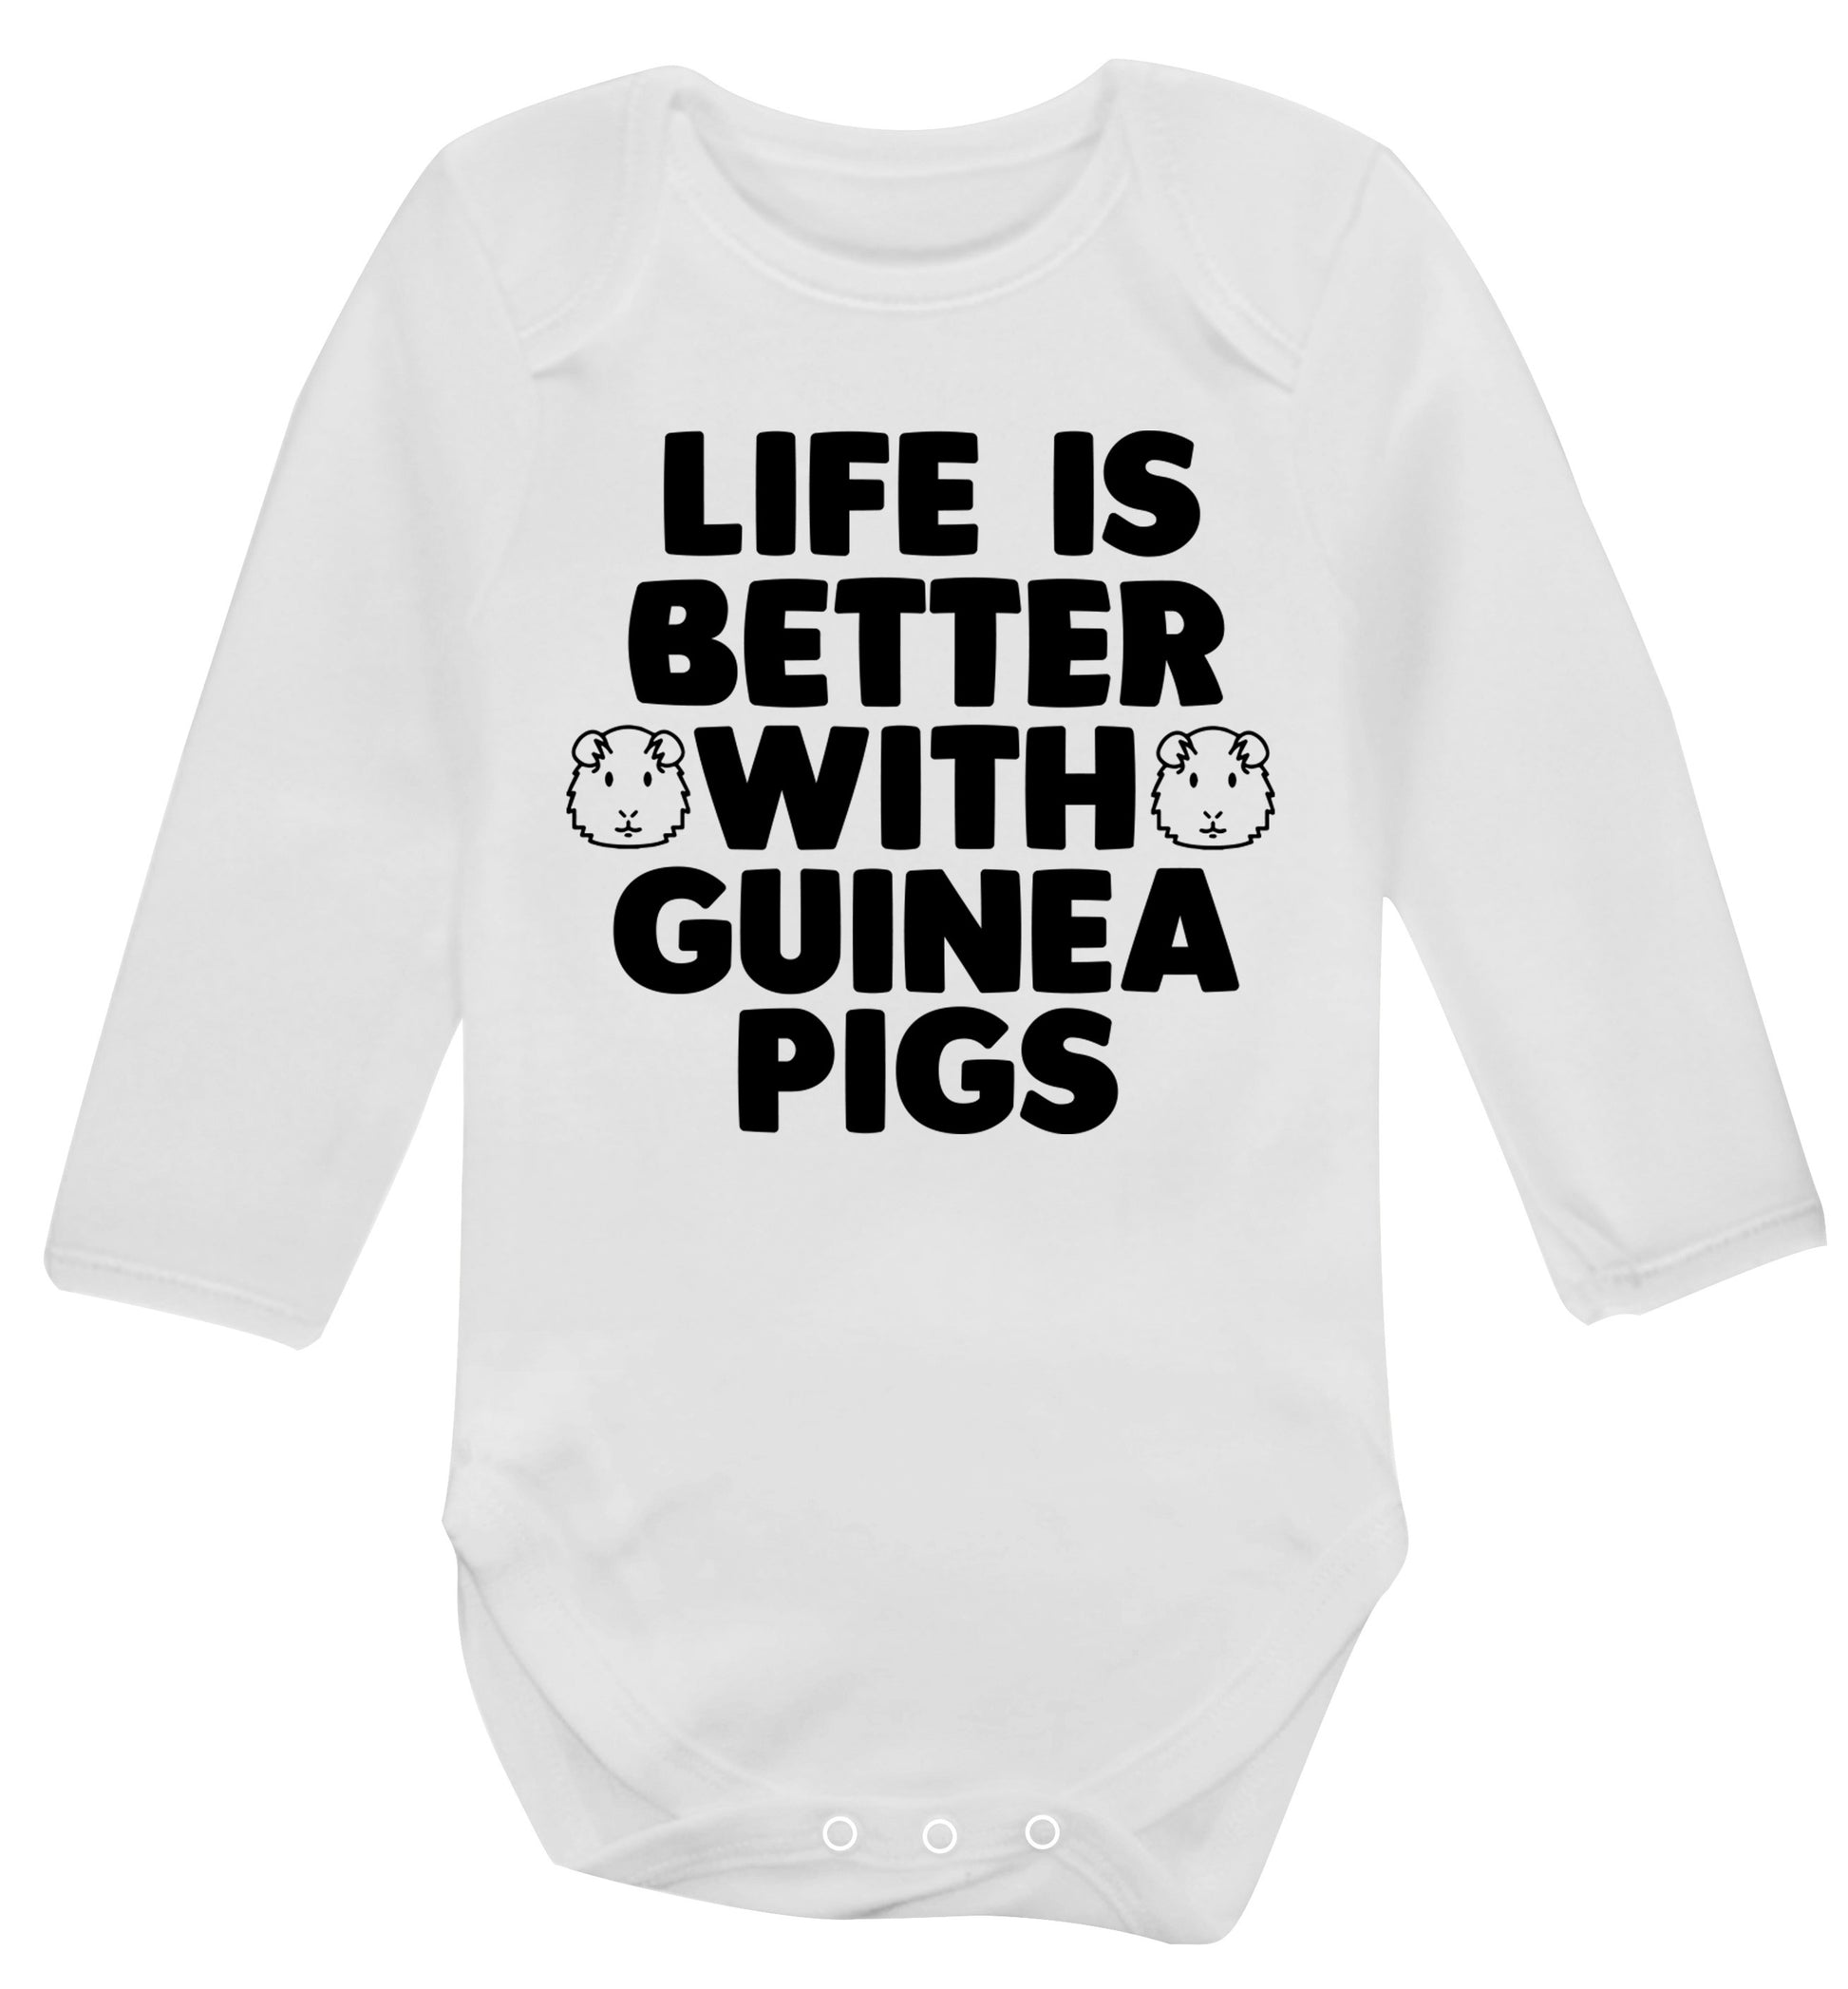 Life is better with guinea pigs Baby Vest long sleeved white 6-12 months